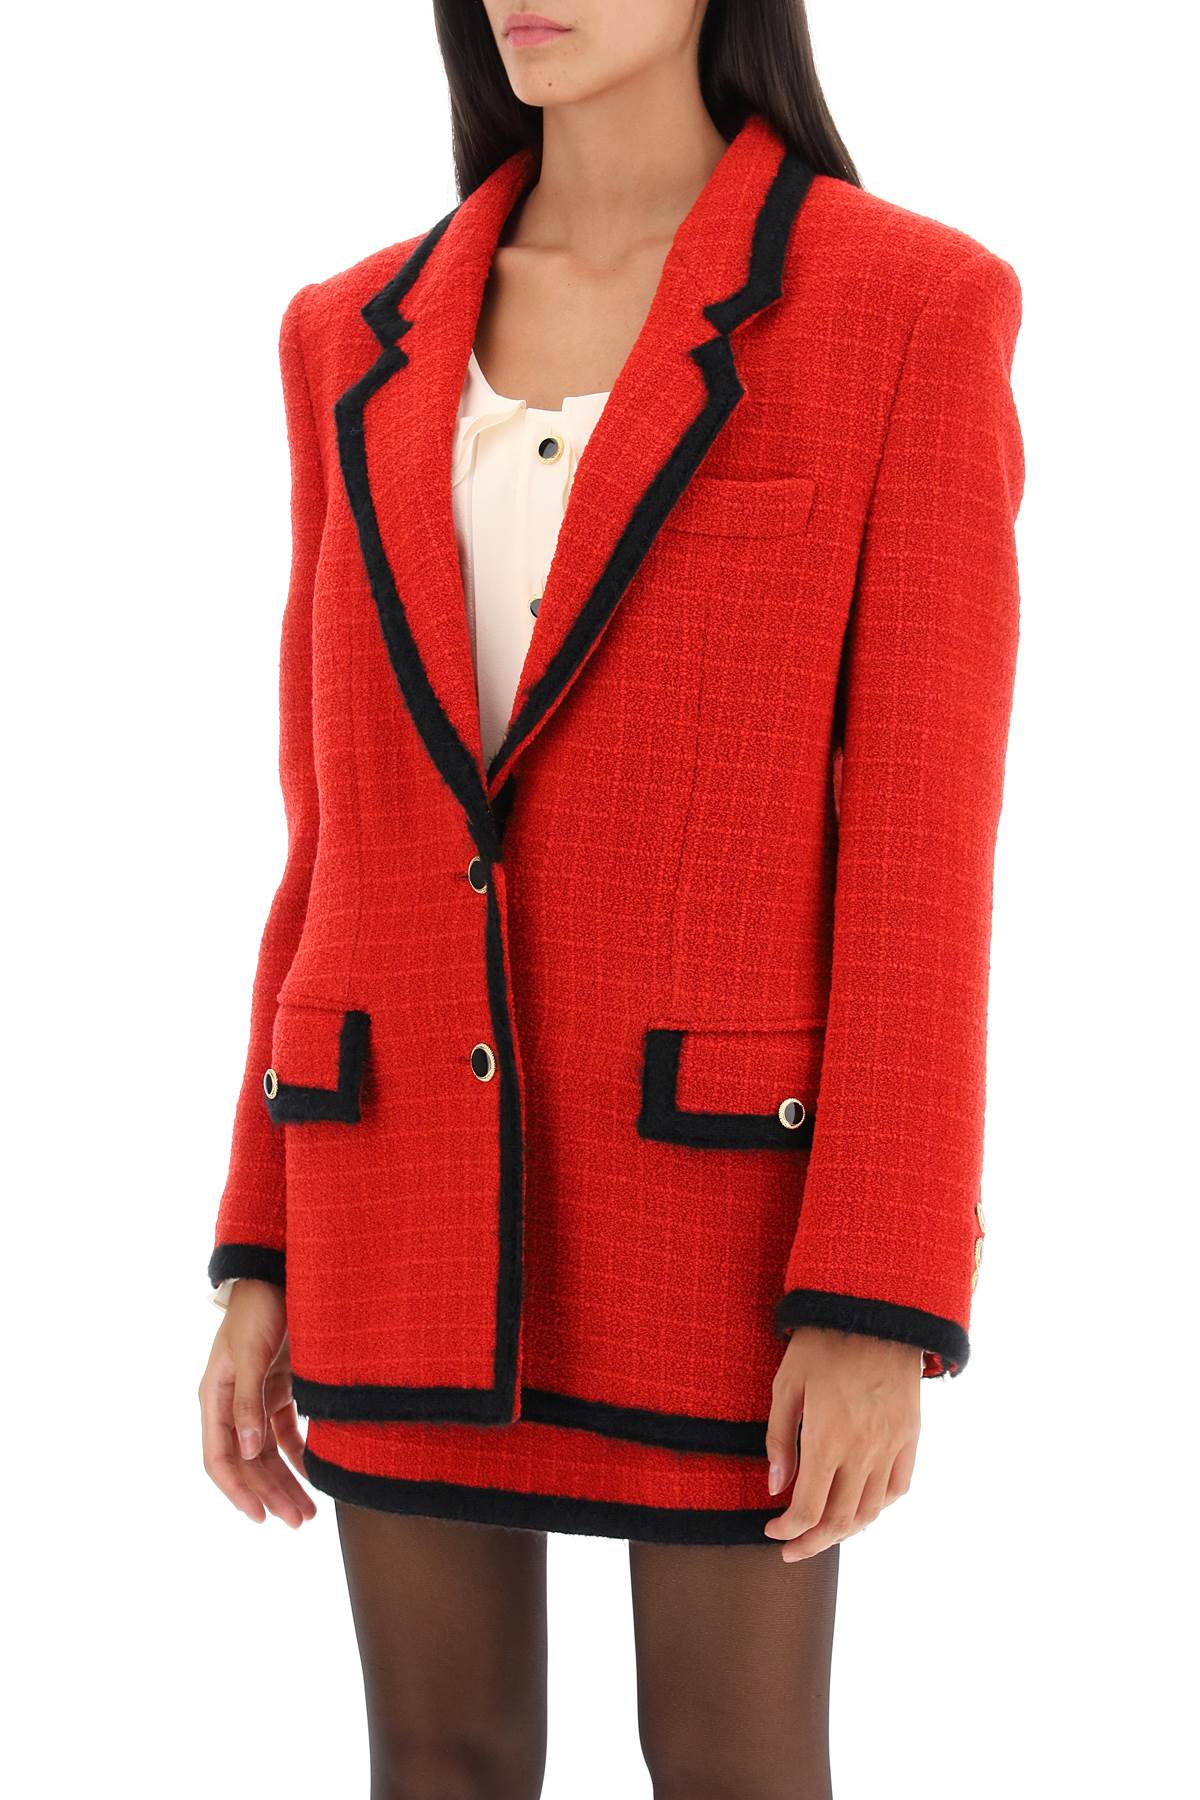 Alessandra rich single-breasted boucle tweed jacket-women > clothing > jackets > blazers and vests-Alessandra Rich-40-Red-Urbanheer